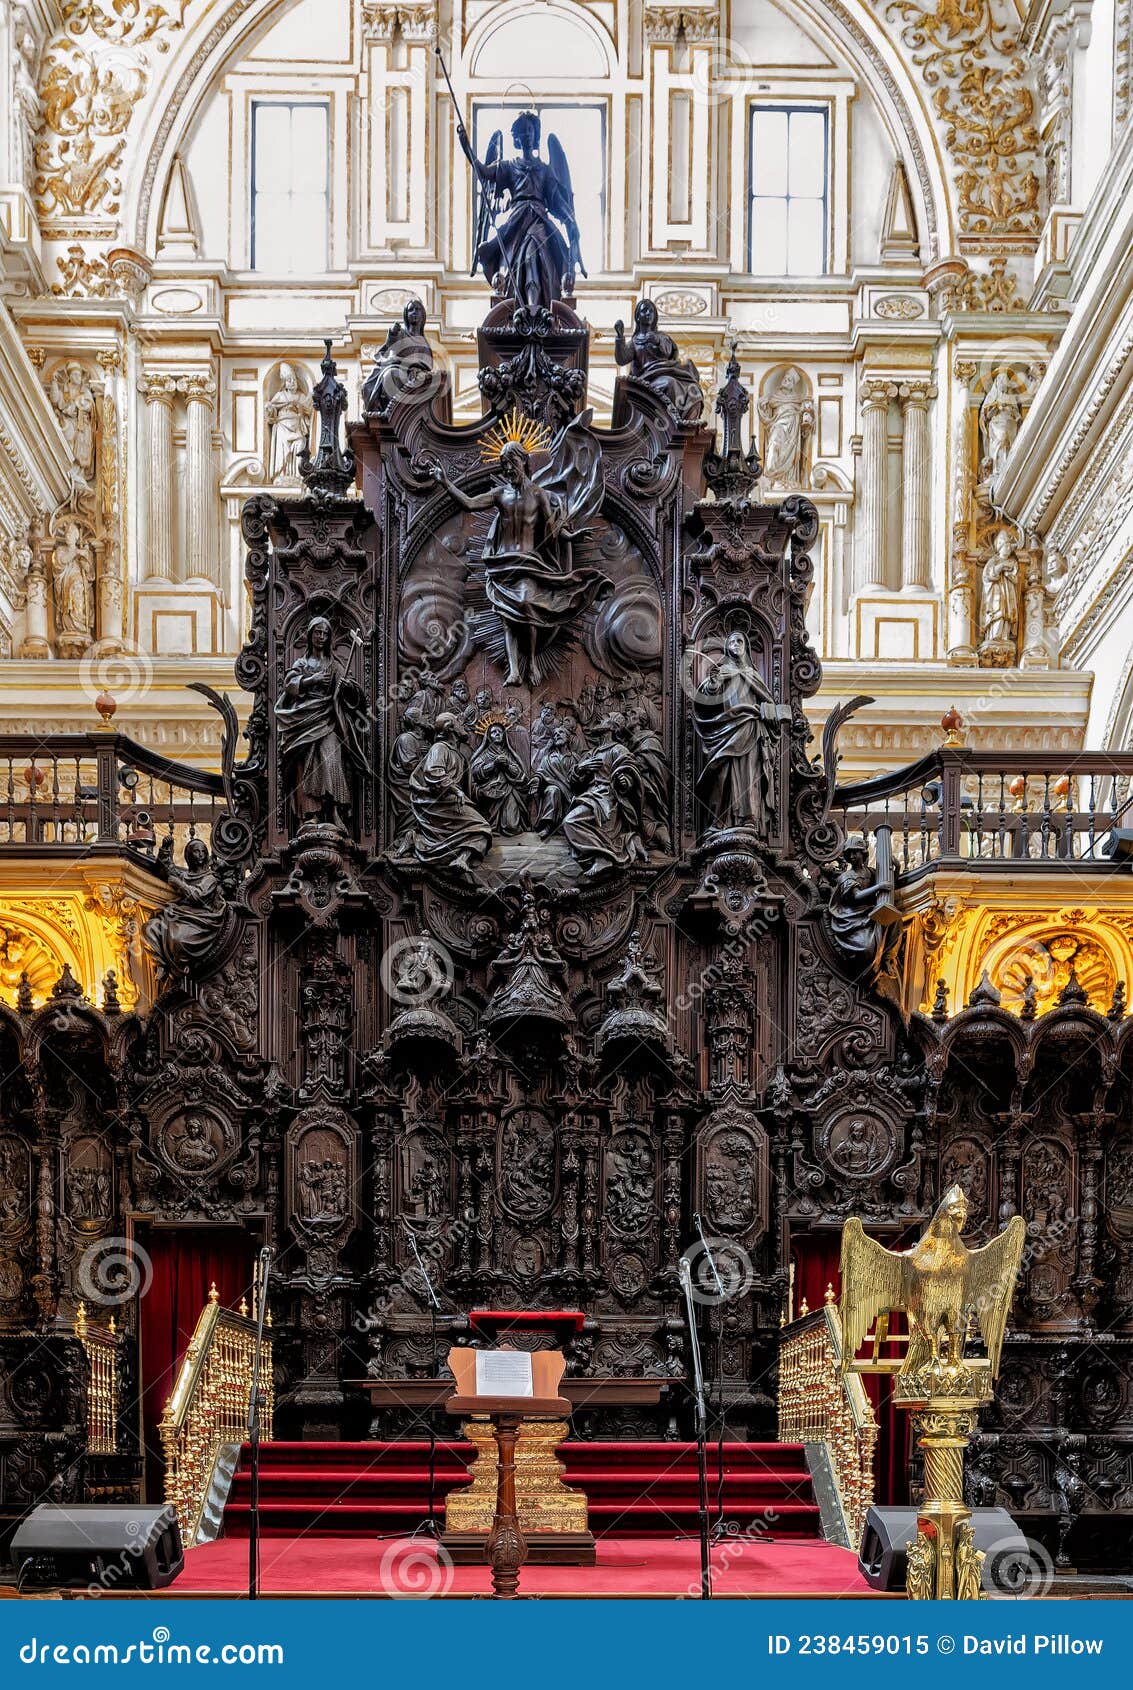 episcopal throne in the area of the choir stalls of the mosque-cathedral of cordoba in spain.